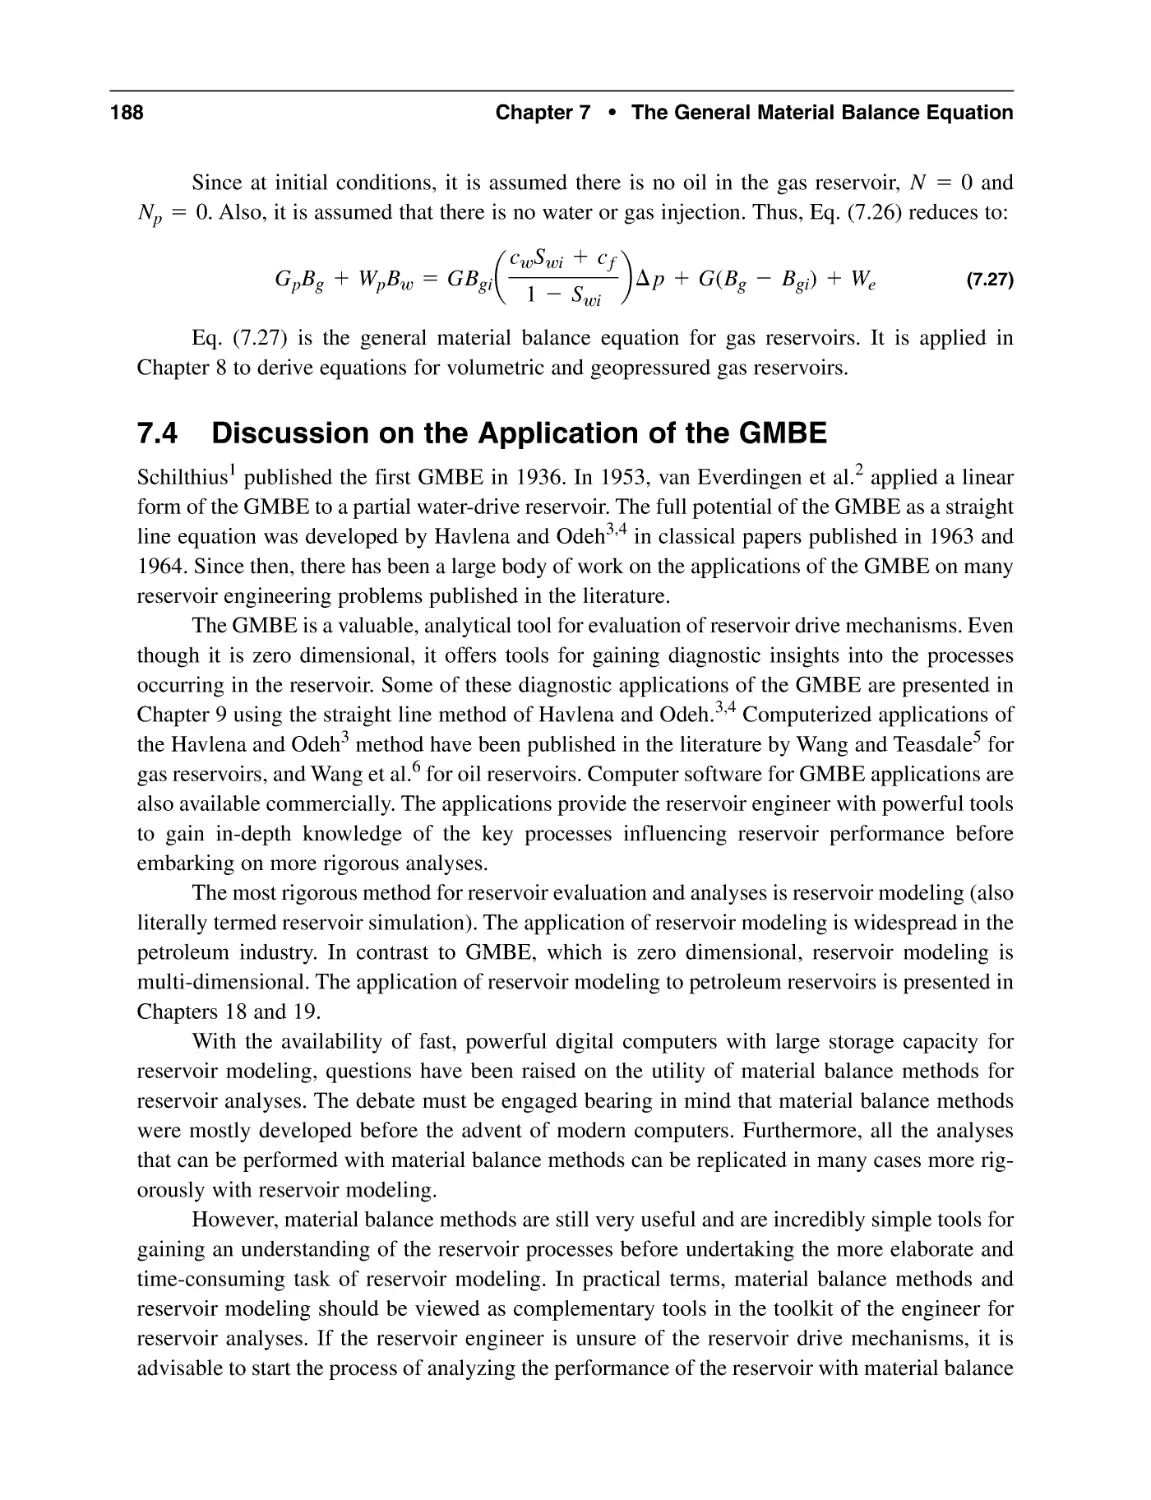 7.4 Discussion on the Application of the GMBE